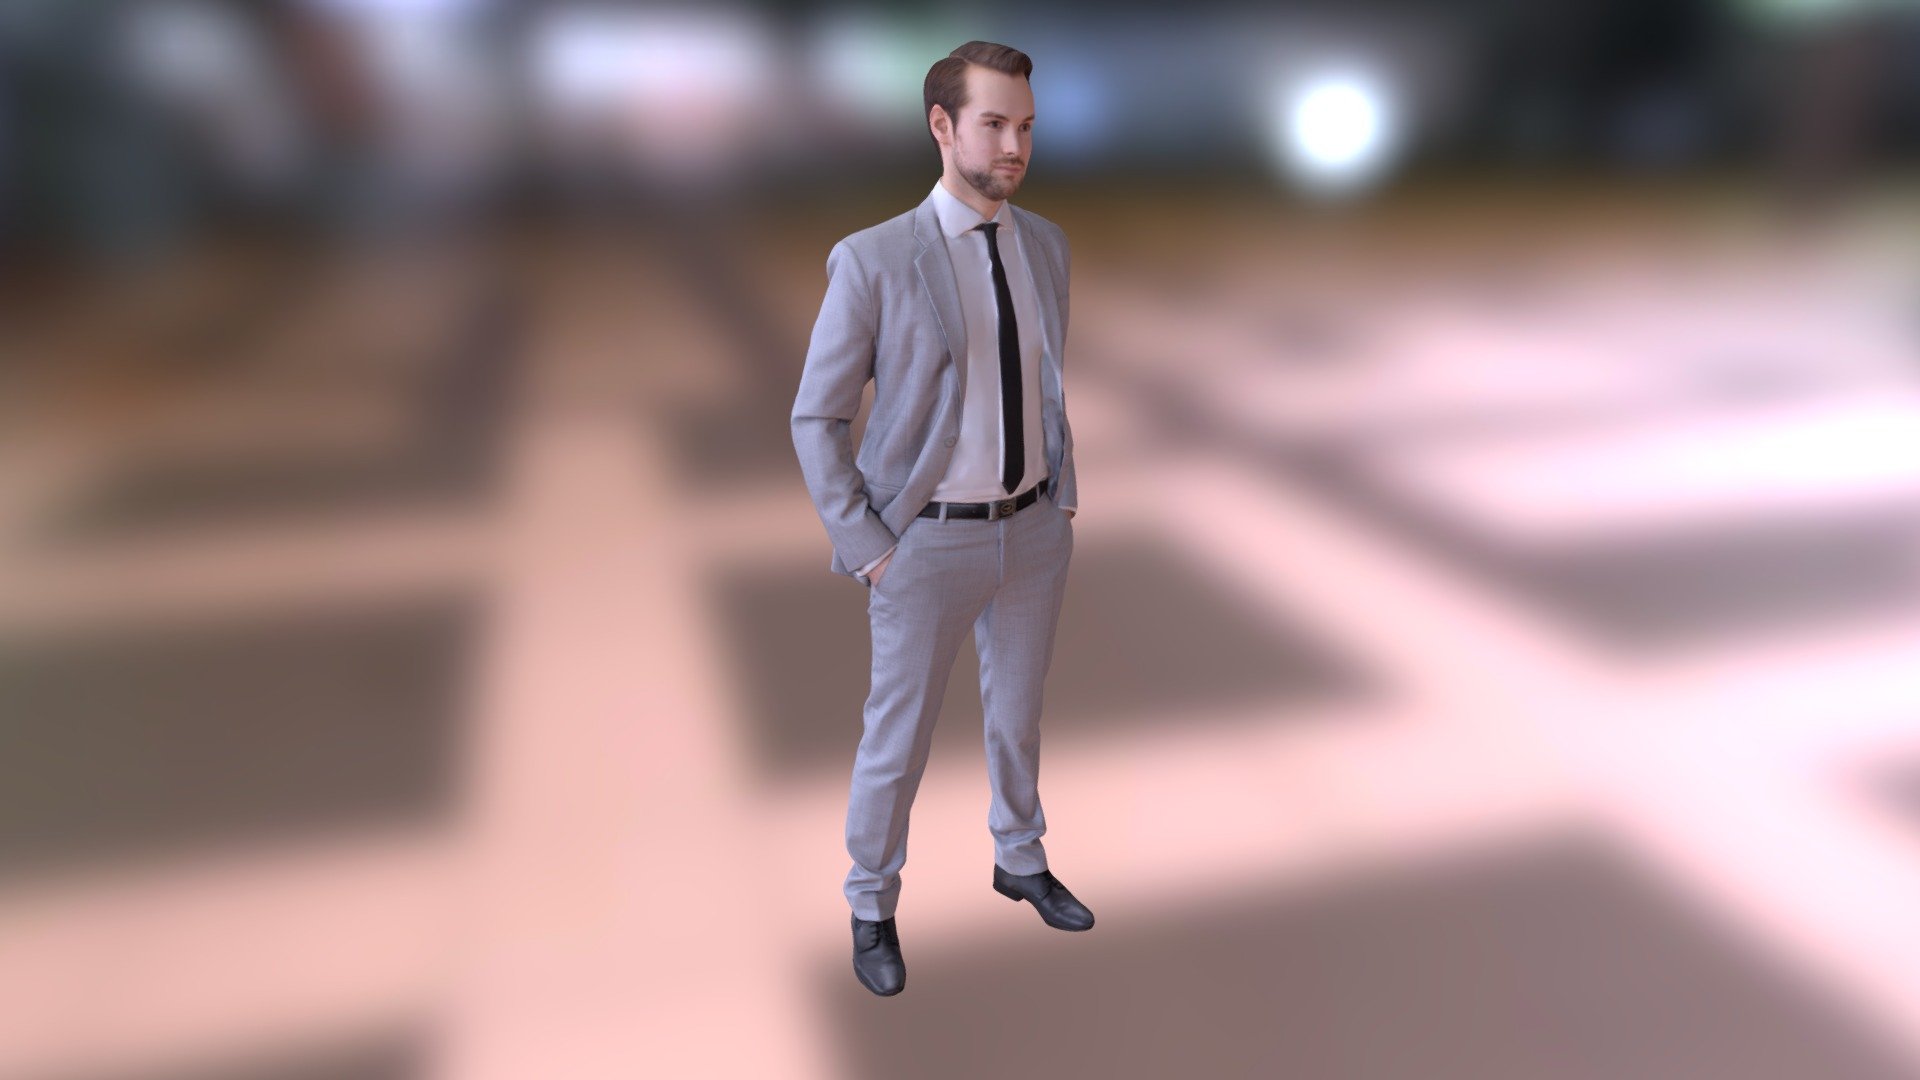 Preview of Joscha 117 in our business 3D people bundle for architectural visualizations. Texture down sized to 4k for preview.

https://www.hdri-hub.com/hdrishop/3d-models/renderpeople/item/500-renderpeople-business-01-3d-characters?utm_source=sketchfab&amp;utm_medium=model&amp;utm_content=business-01&amp;utm_campaign=renderpeople - RP Man Joscha 0117 - 3D model by HDRI Hub (@hdrihub) 3d model